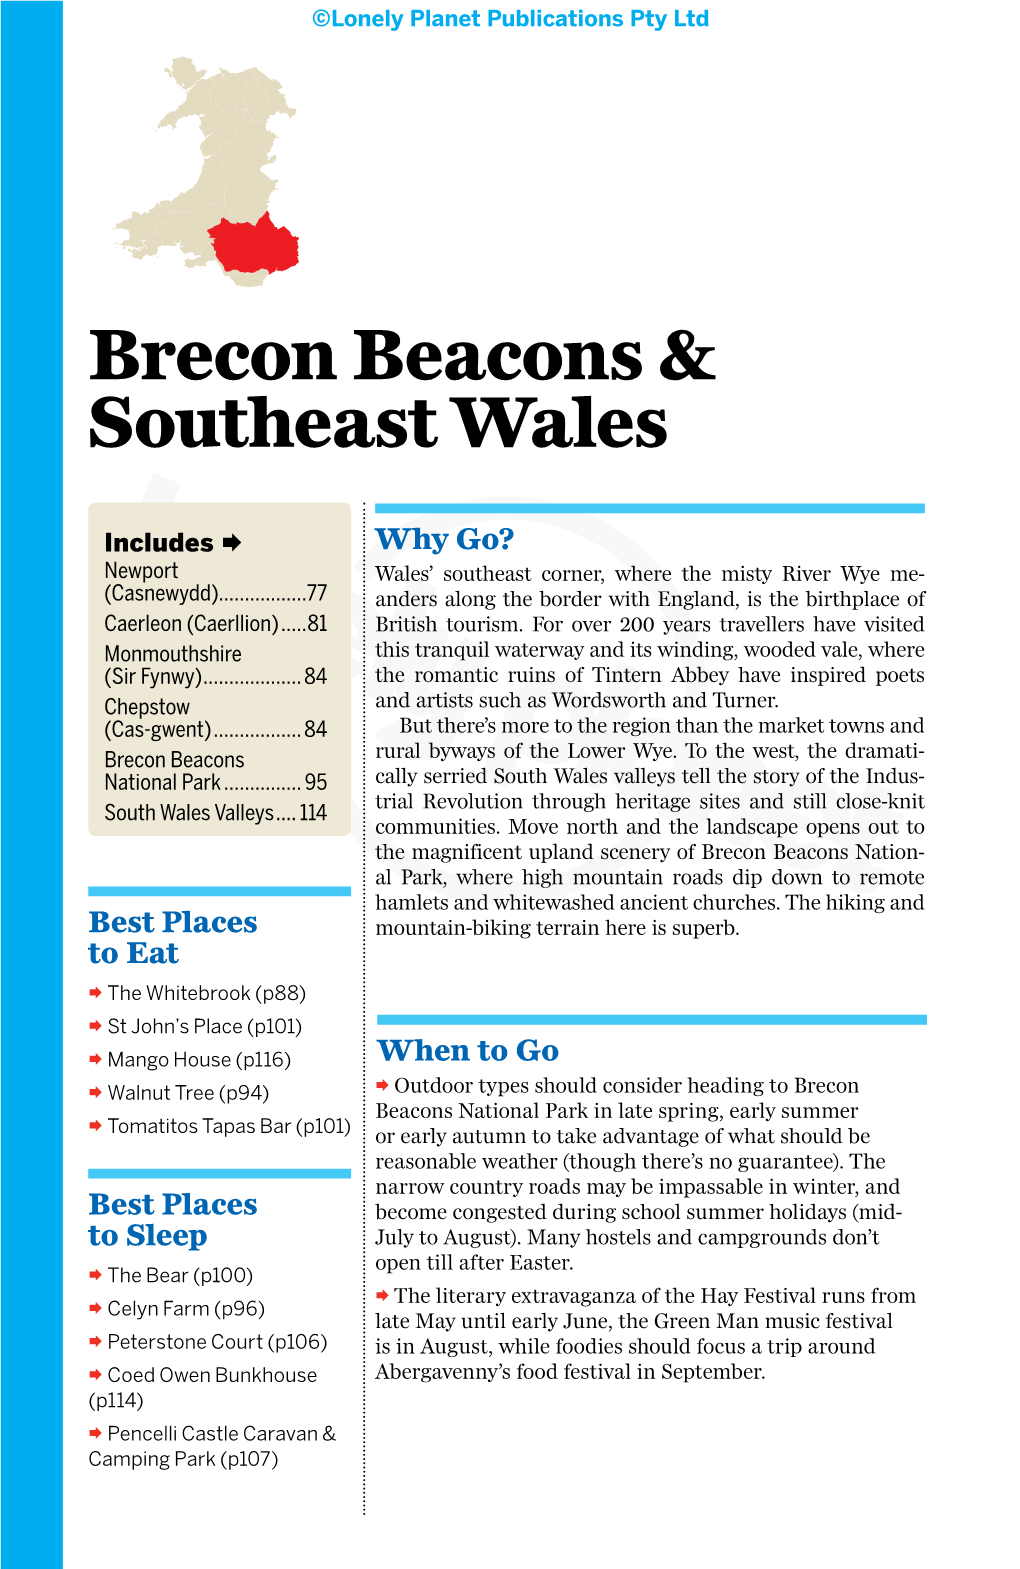 Brecon Beacons & Southeast Wales